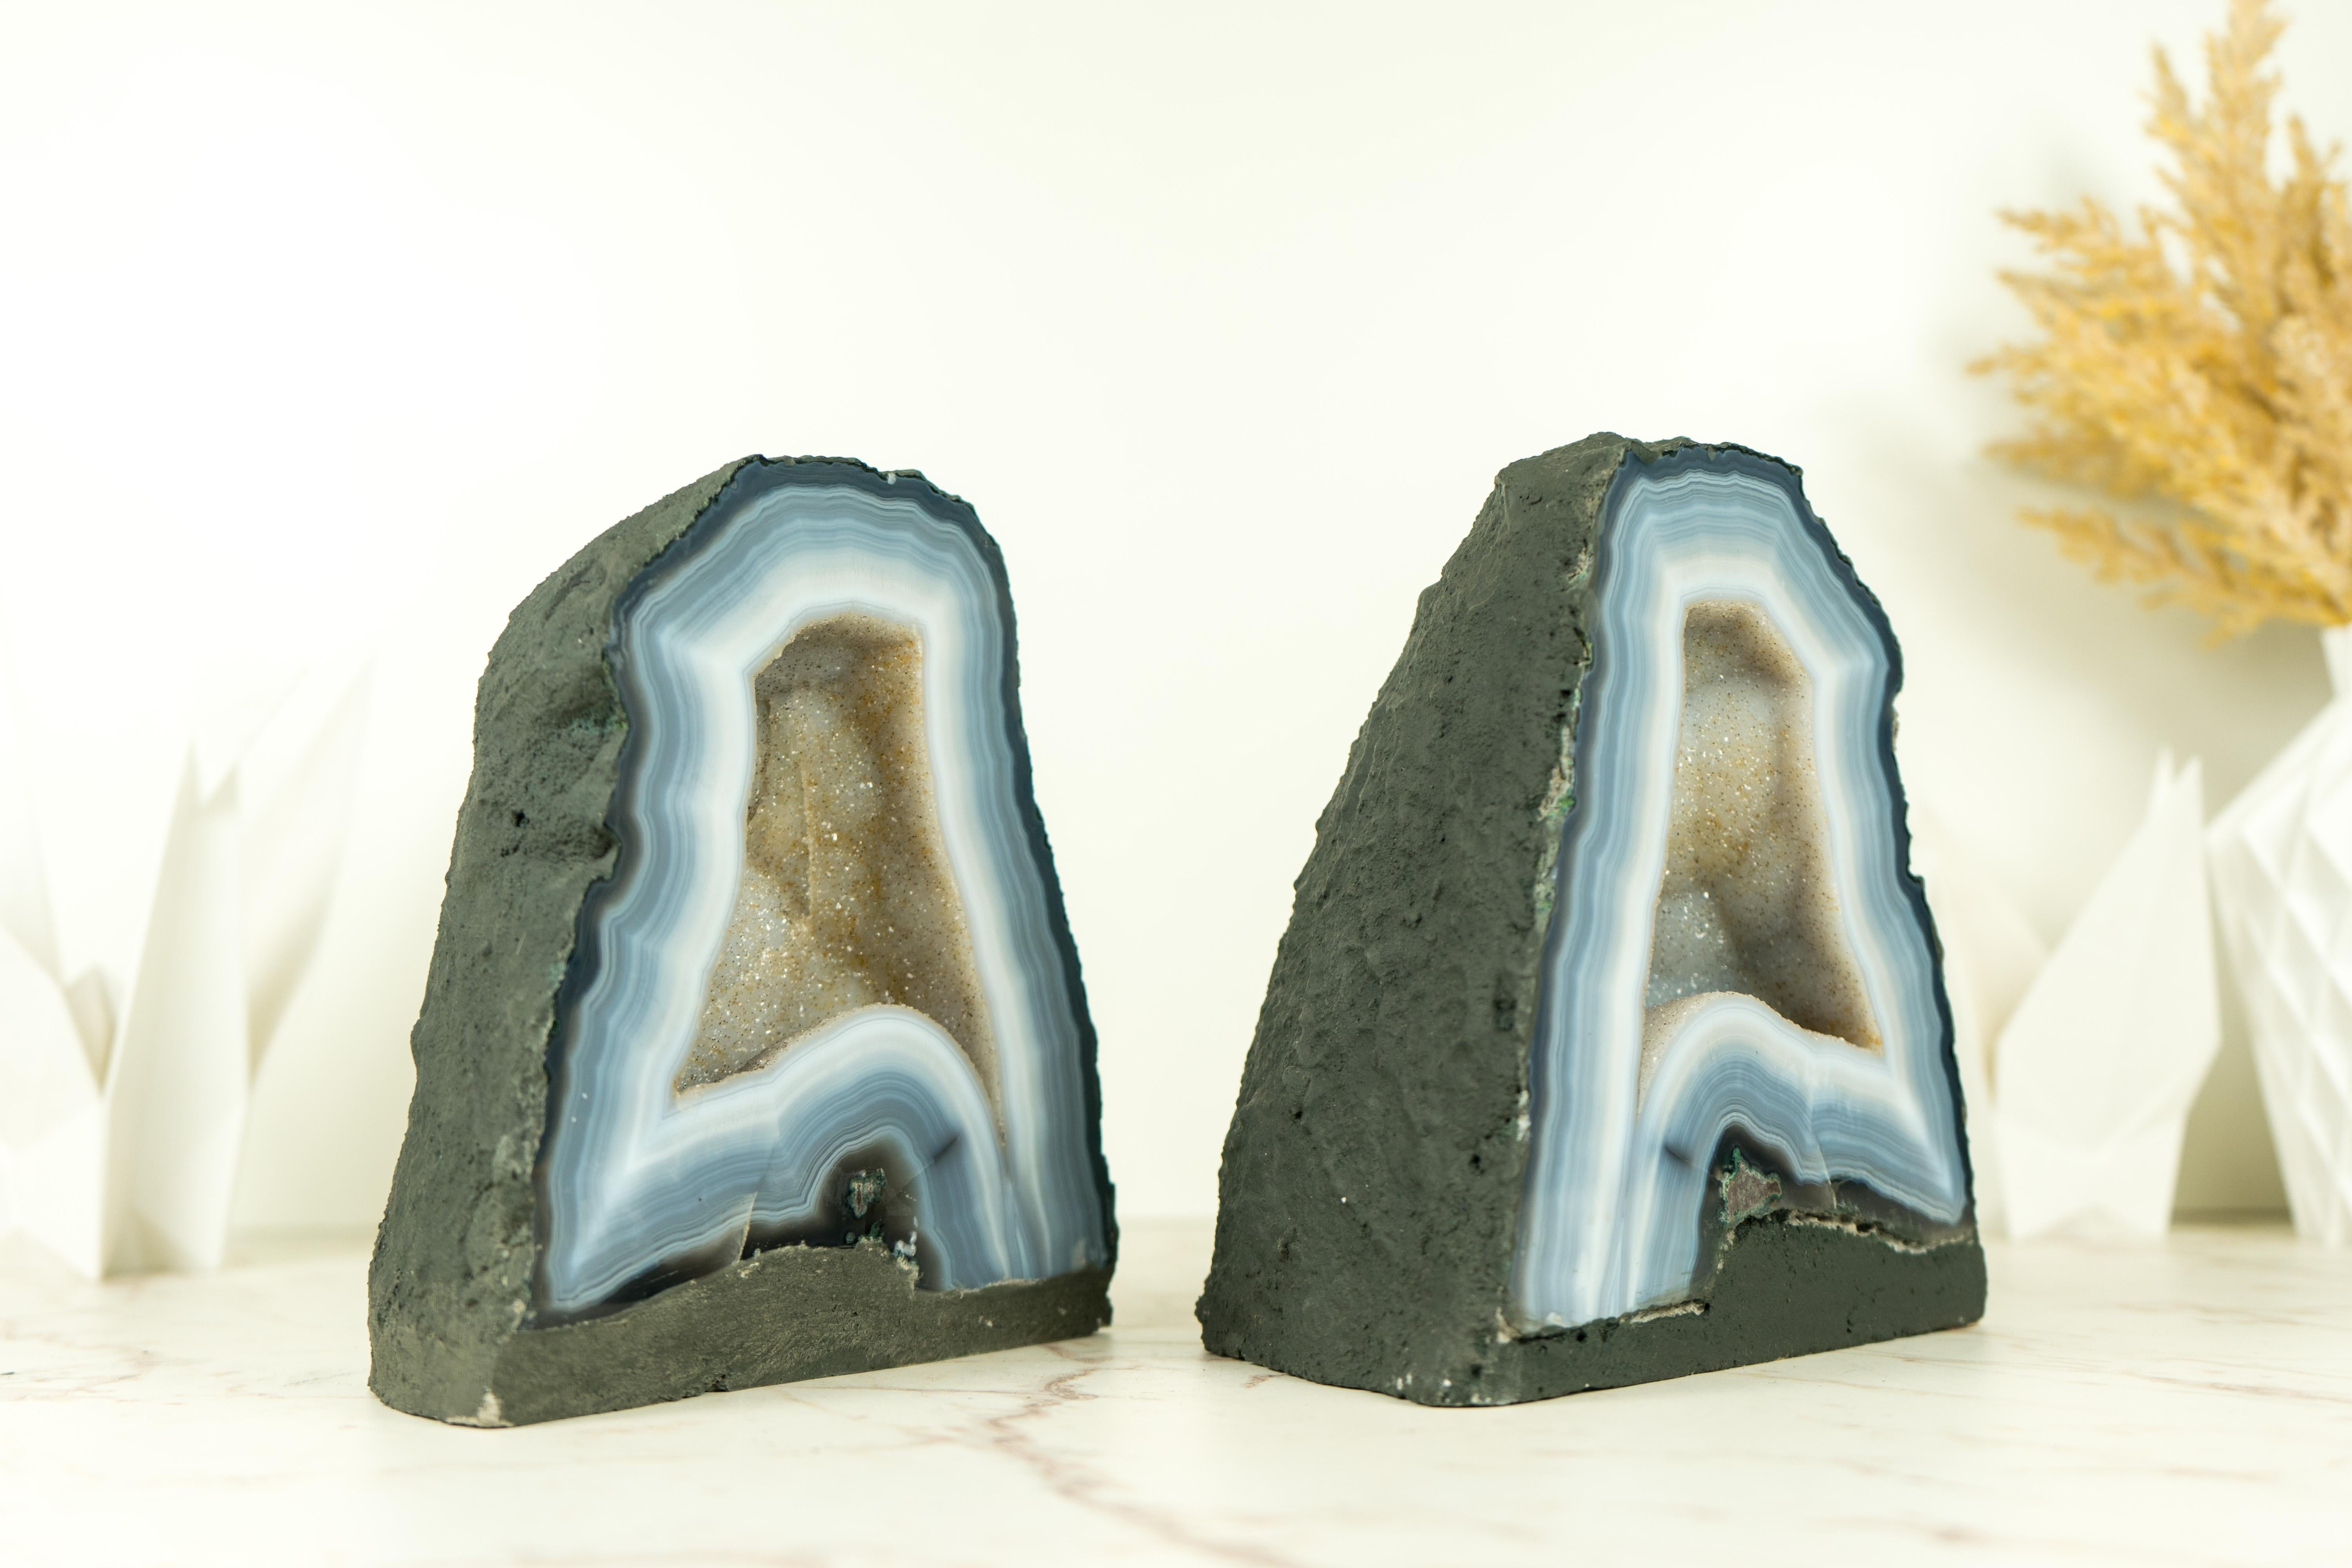 Small yet stunning, this pair of Bookmatching Blue and White Lace Agate Geodes brings numerous flawless natural agate laces, along with sparkly white galaxy crystals that form the beautiful aesthetics of the pair. It's undoubtedly of standout